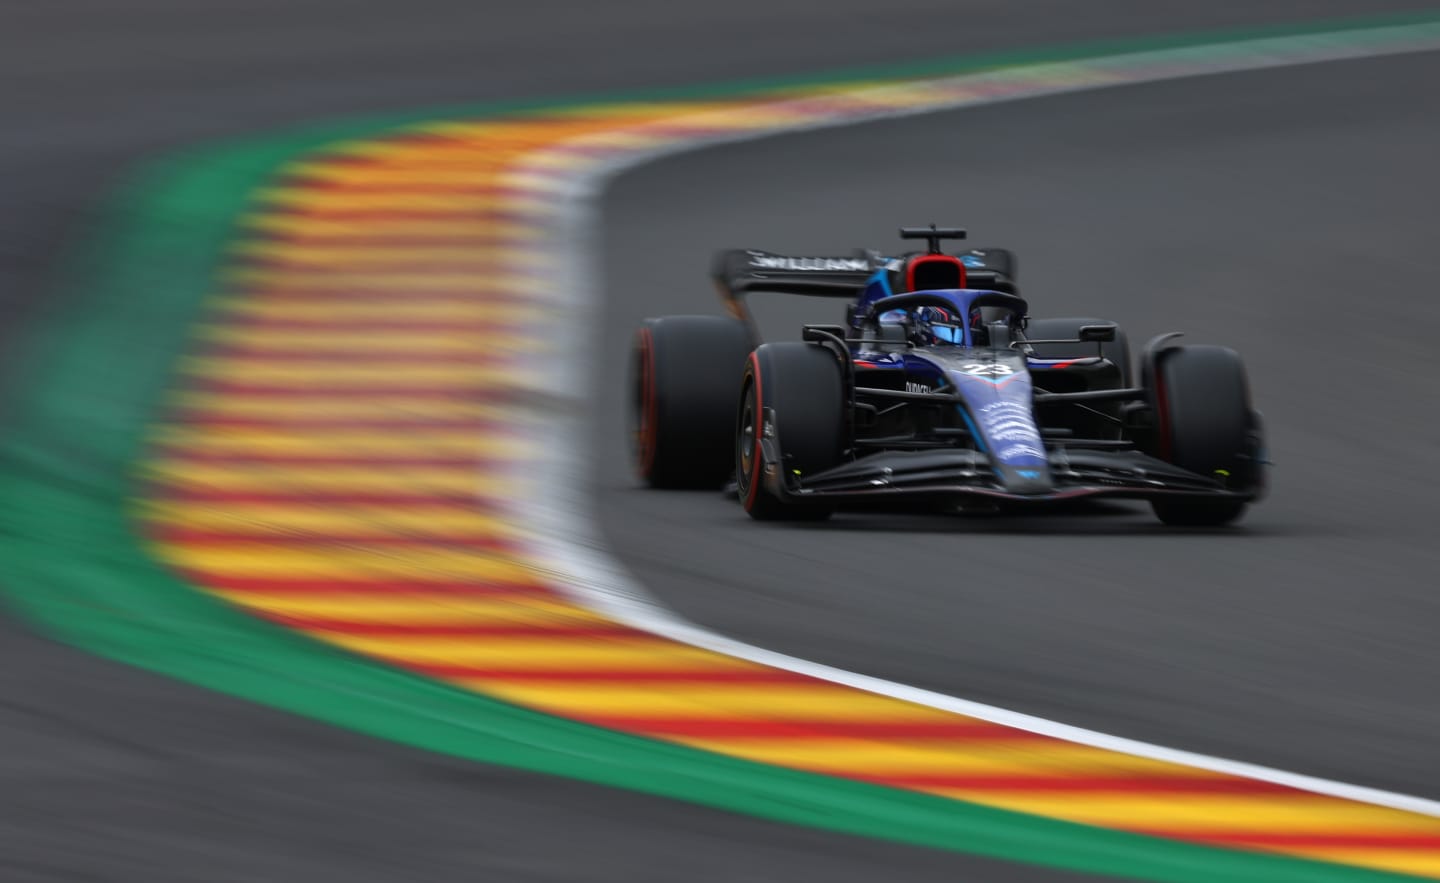 SPA, BELGIUM - AUGUST 27: Alexander Albon of Thailand driving the (23) Williams FW44 Mercedes on track during qualifying ahead of the F1 Grand Prix of Belgium at Circuit de Spa-Francorchamps on August 27, 2022 in Spa, Belgium. (Photo by Lars Baron - Formula 1/Formula 1 via Getty Images)